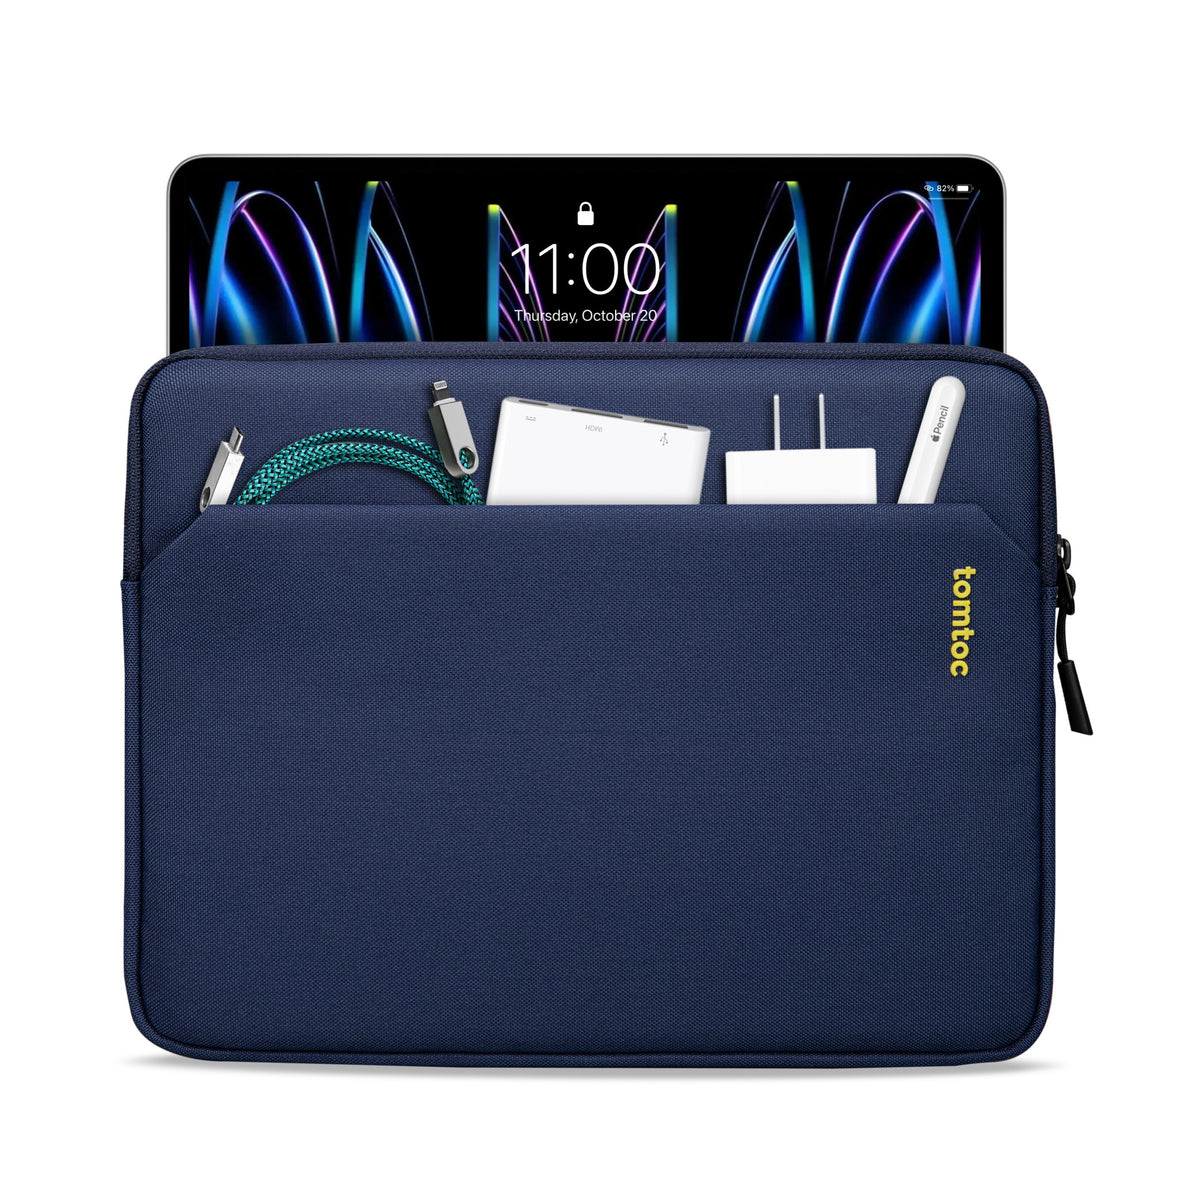 secondary_Light-B18 Tablet Sleeve for 12.9 inch iPad Pro